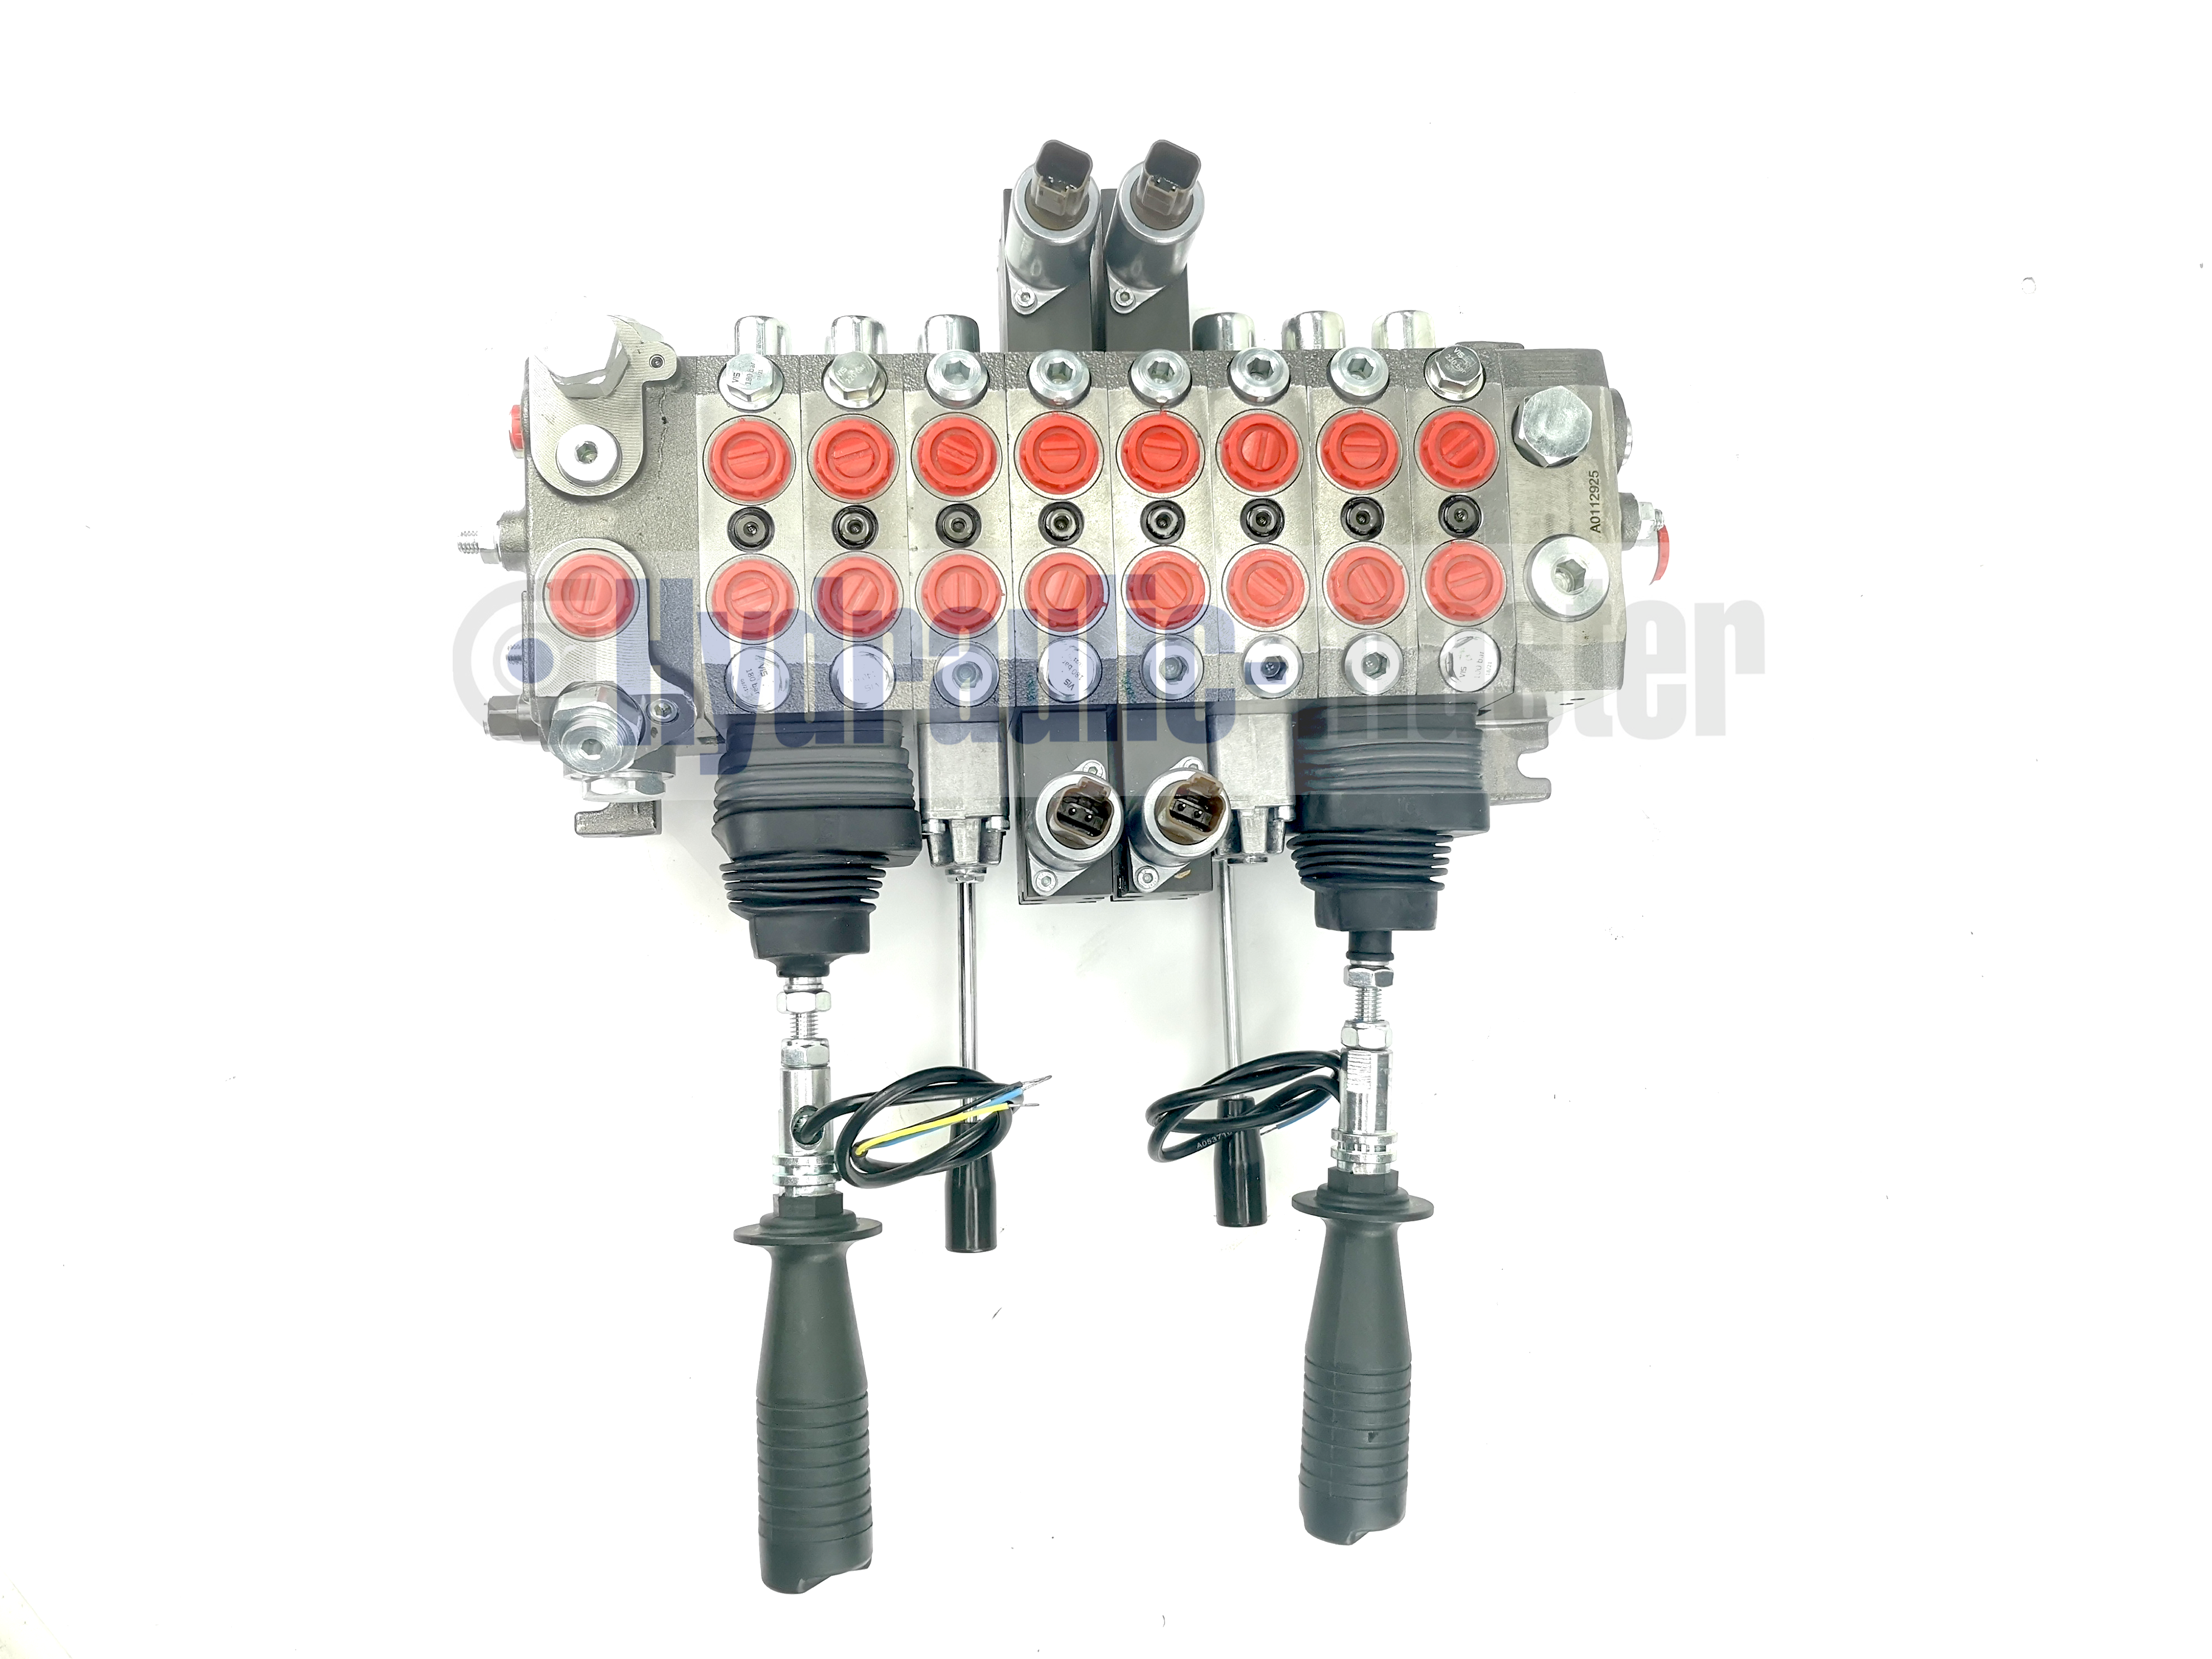 Micro-hydraulic control valve 8-fold until 10bar 43x19x72mm, Valves  Leimbach, Hydraulics, Vehicle Components